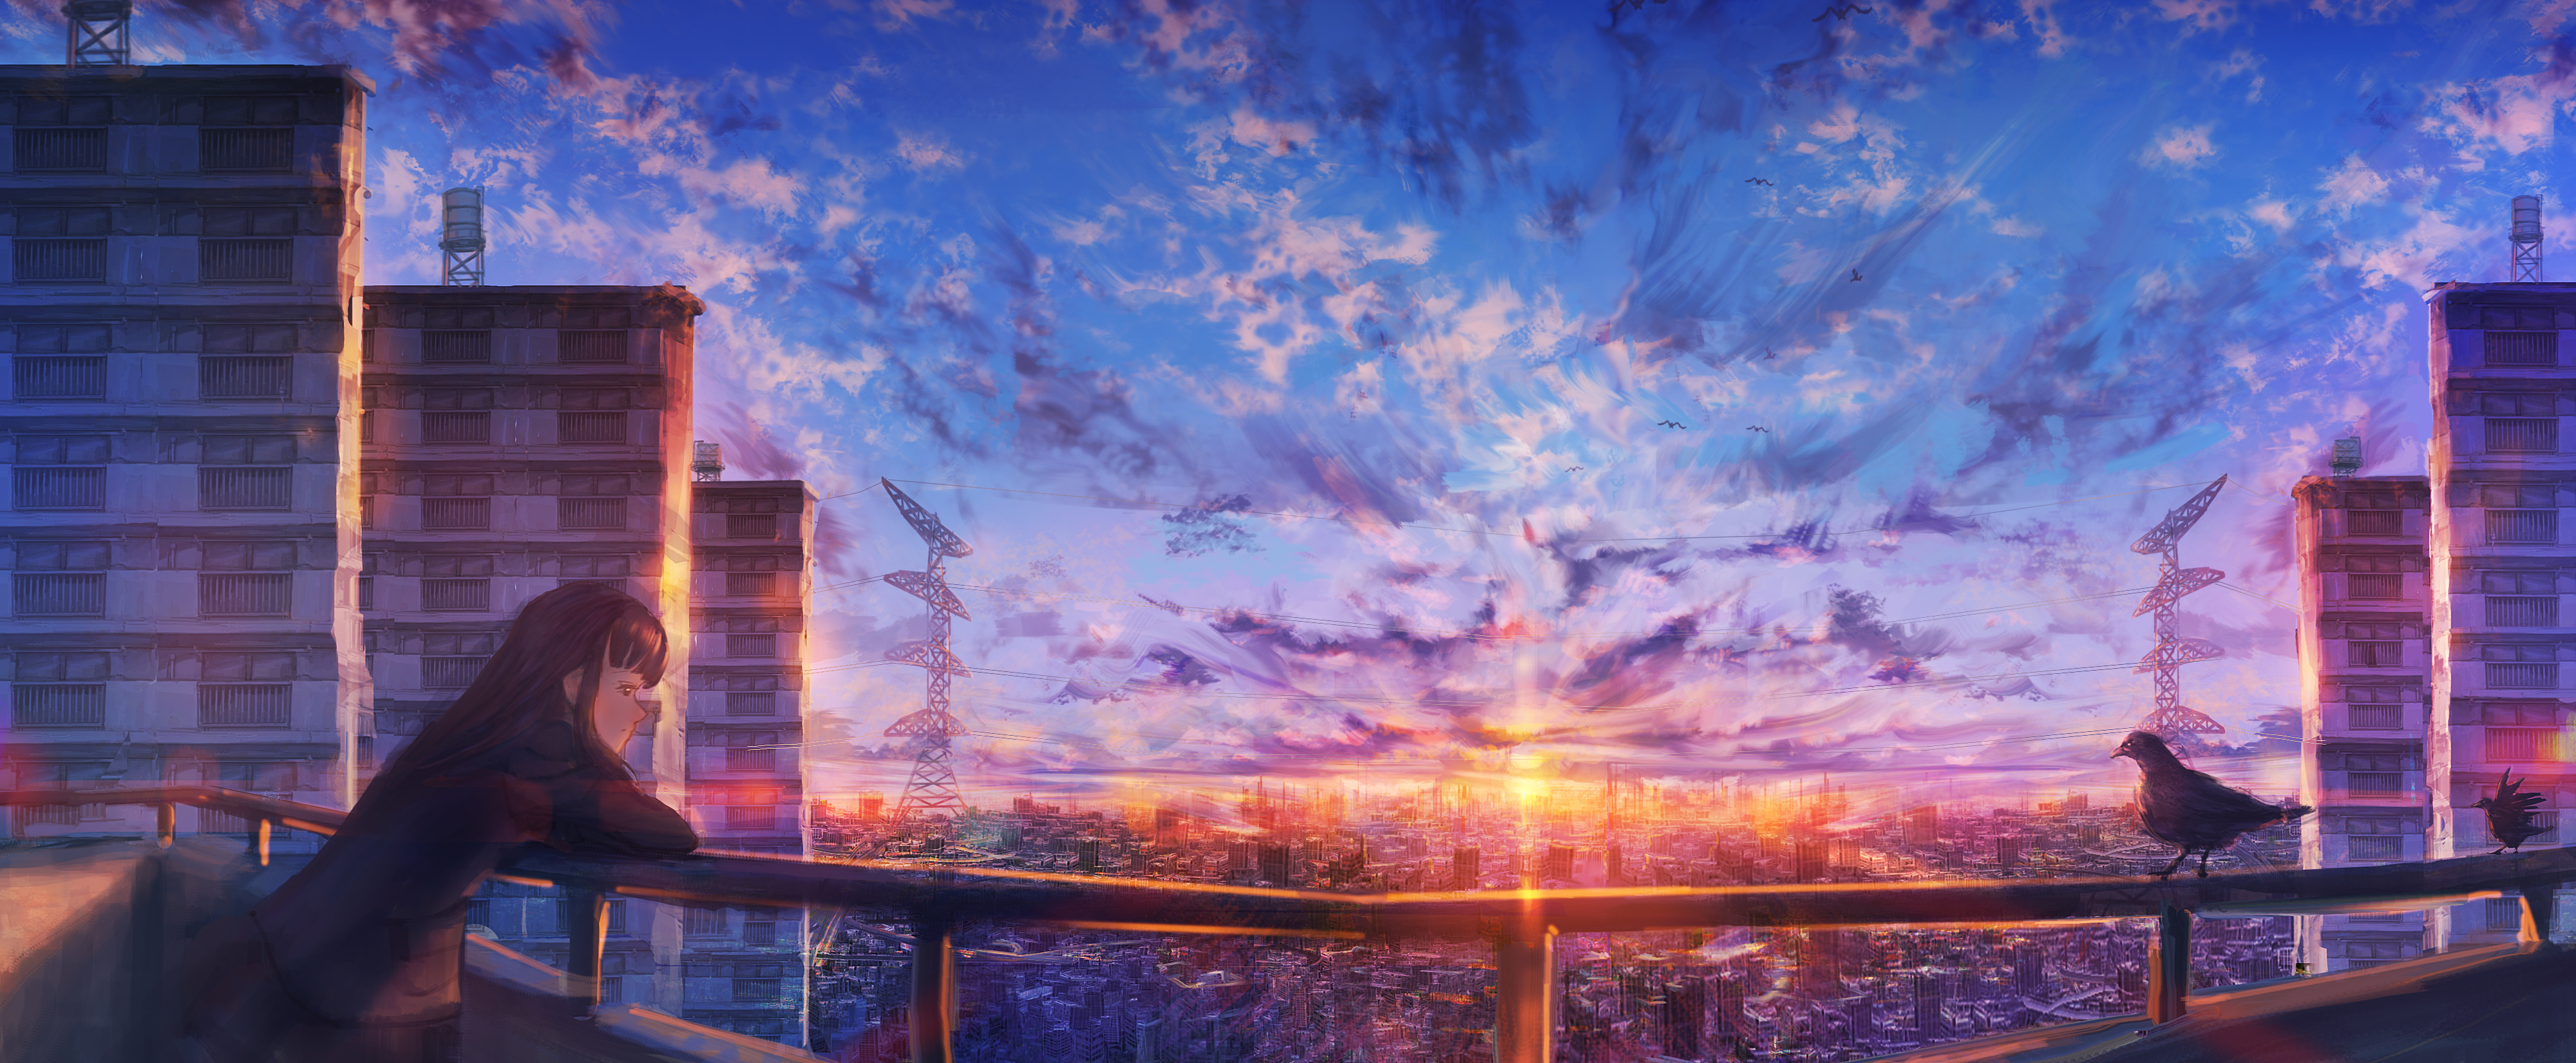 Download Enchanting Anime Sunset Background | Wallpapers.com